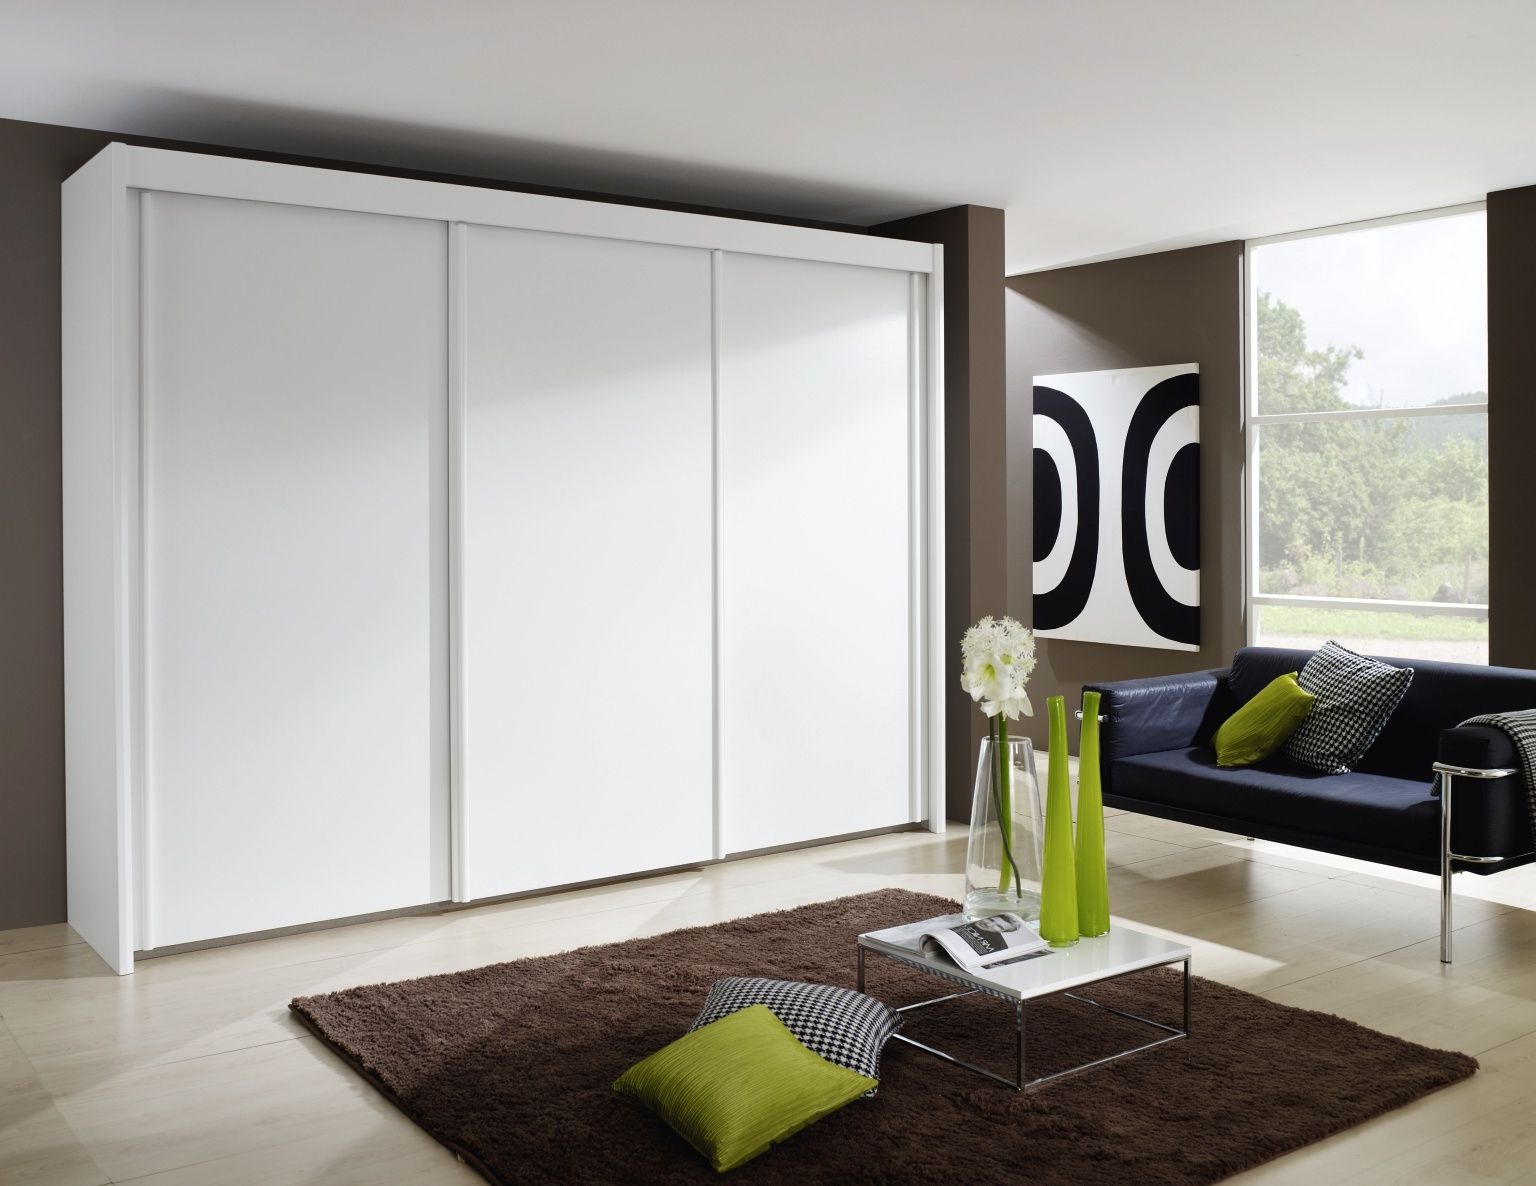 Rauch Imperial 3 Door Sliding Wardrobe In White – W 280cm – Cfs Furniture Uk With Regard To Rauch Imperial Wardrobes (Gallery 9 of 20)